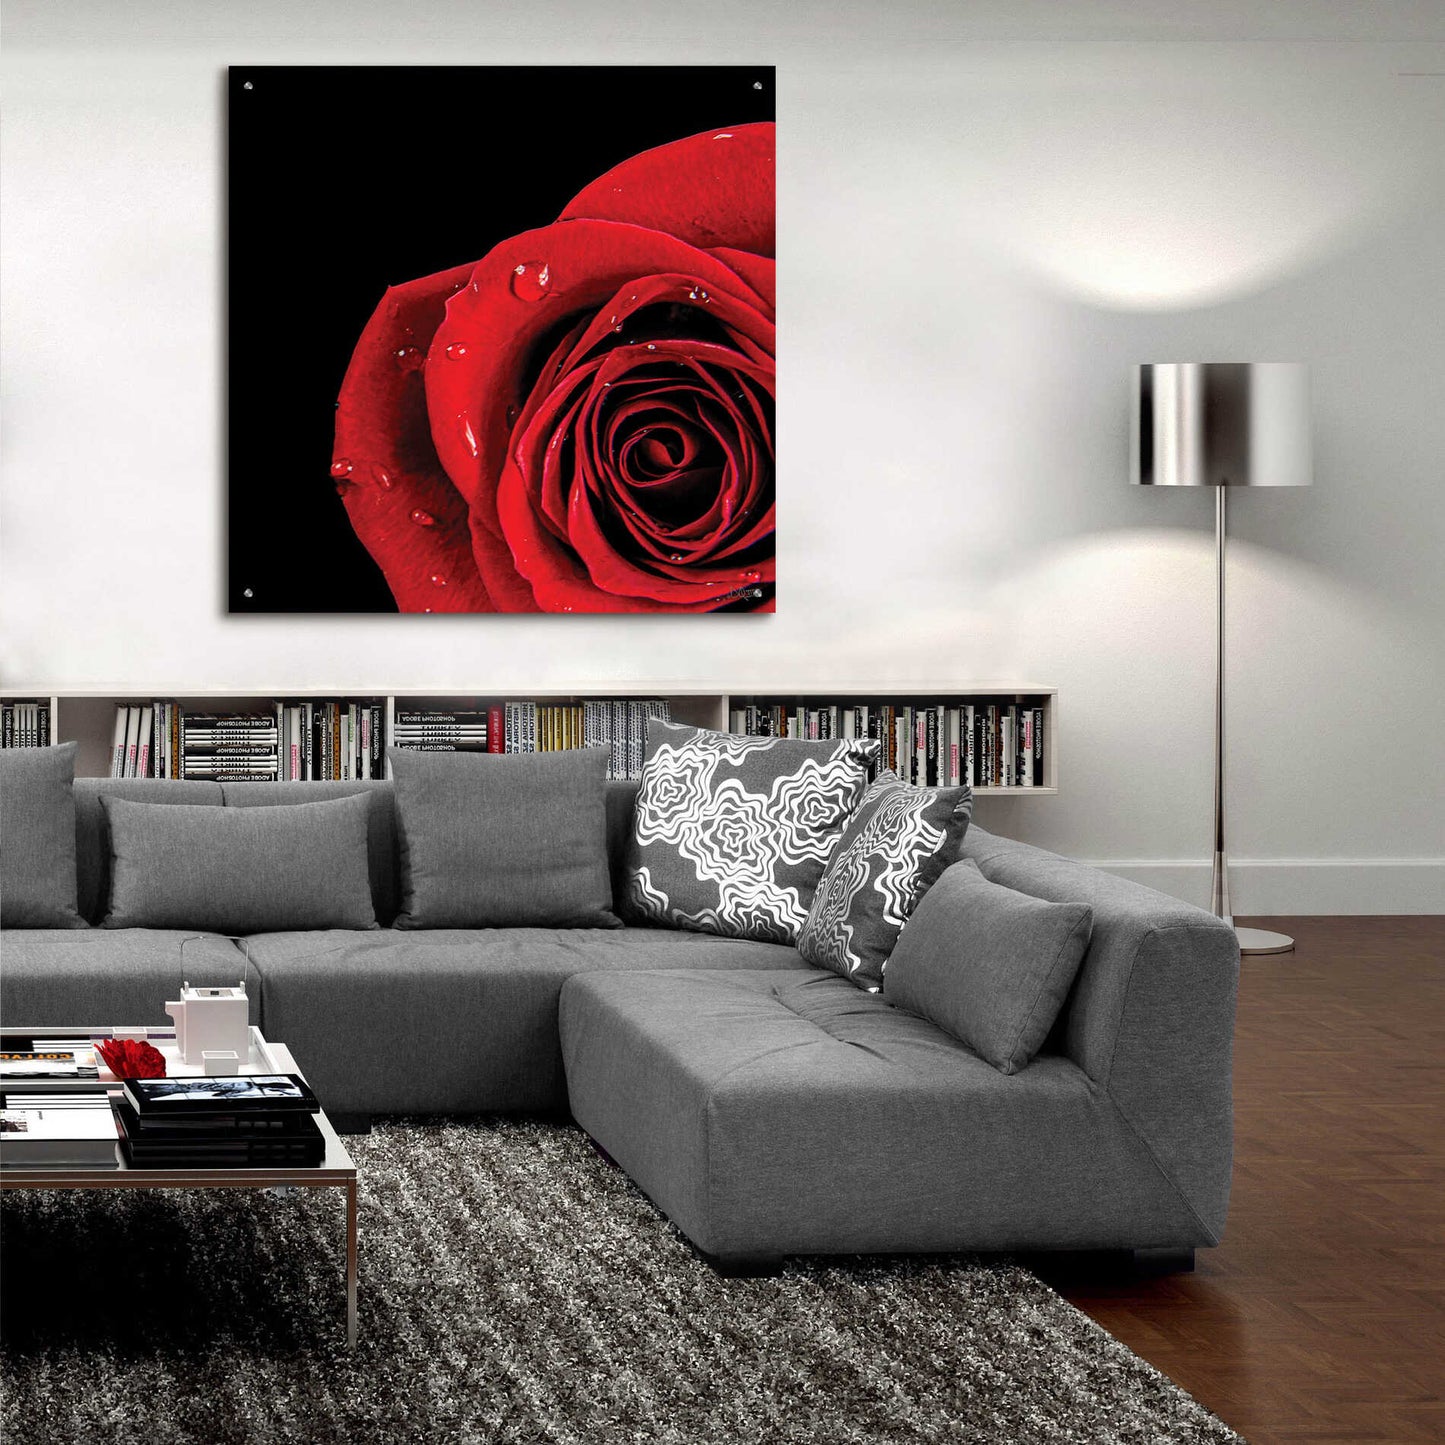 Epic Art 'Pop of Red Rose' by Donnie Quillen, Acrylic Glass Wall Art,36x36